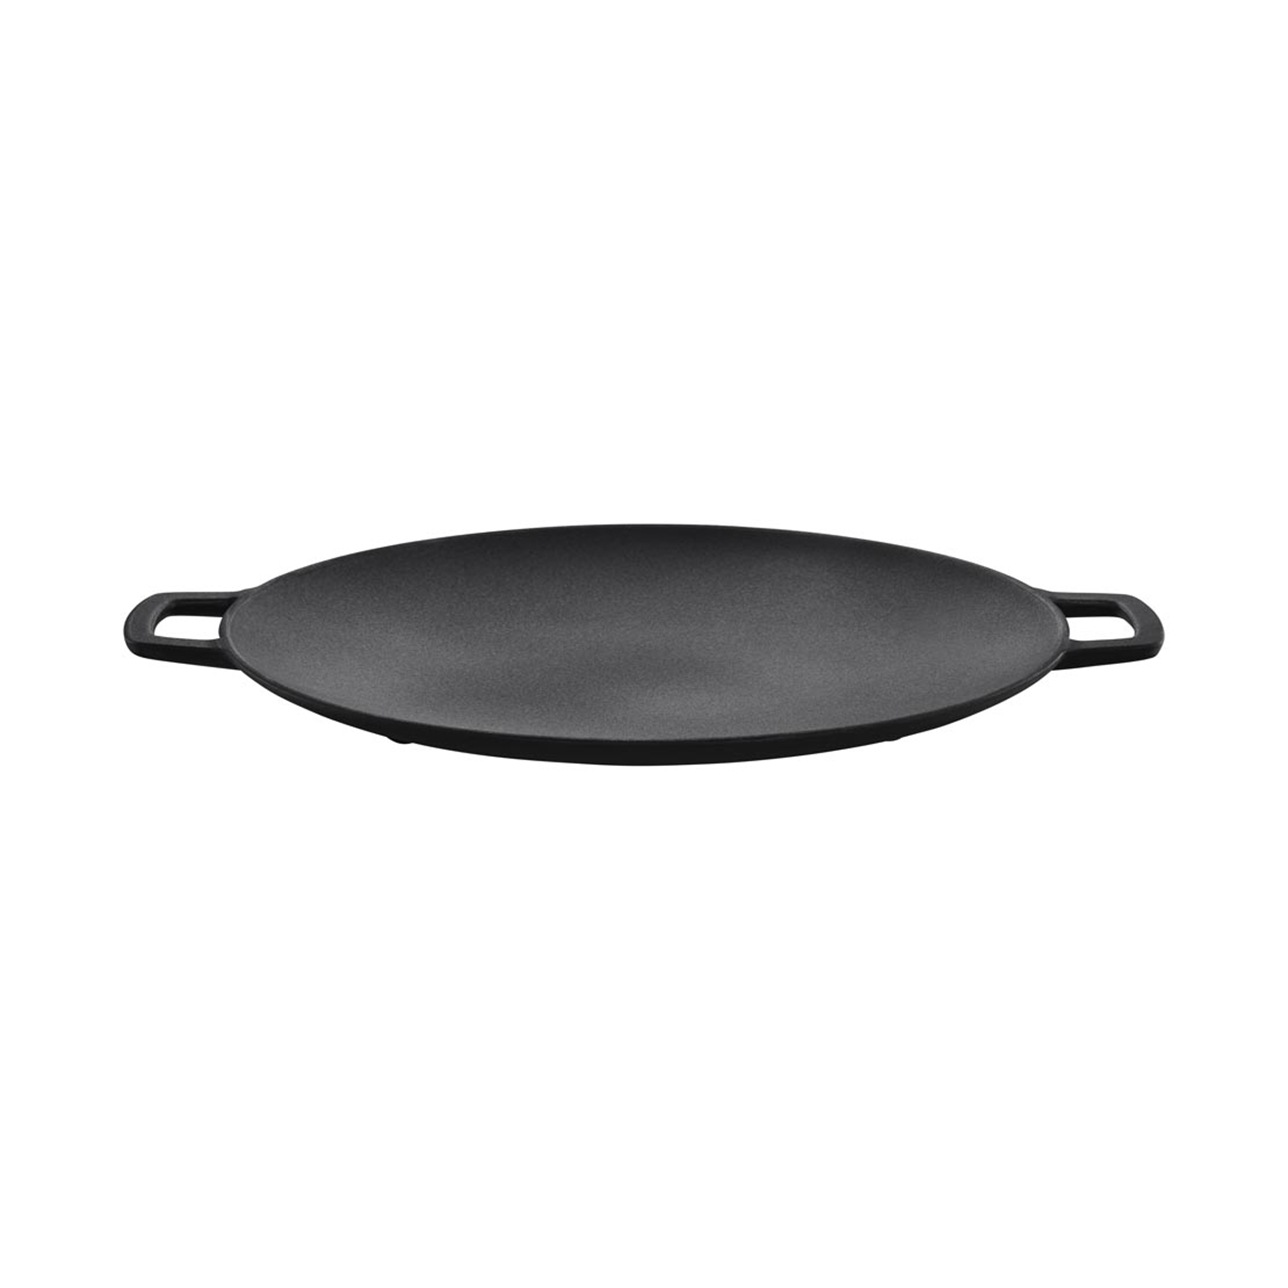 Norden Grill Chef Grill, 30 cm